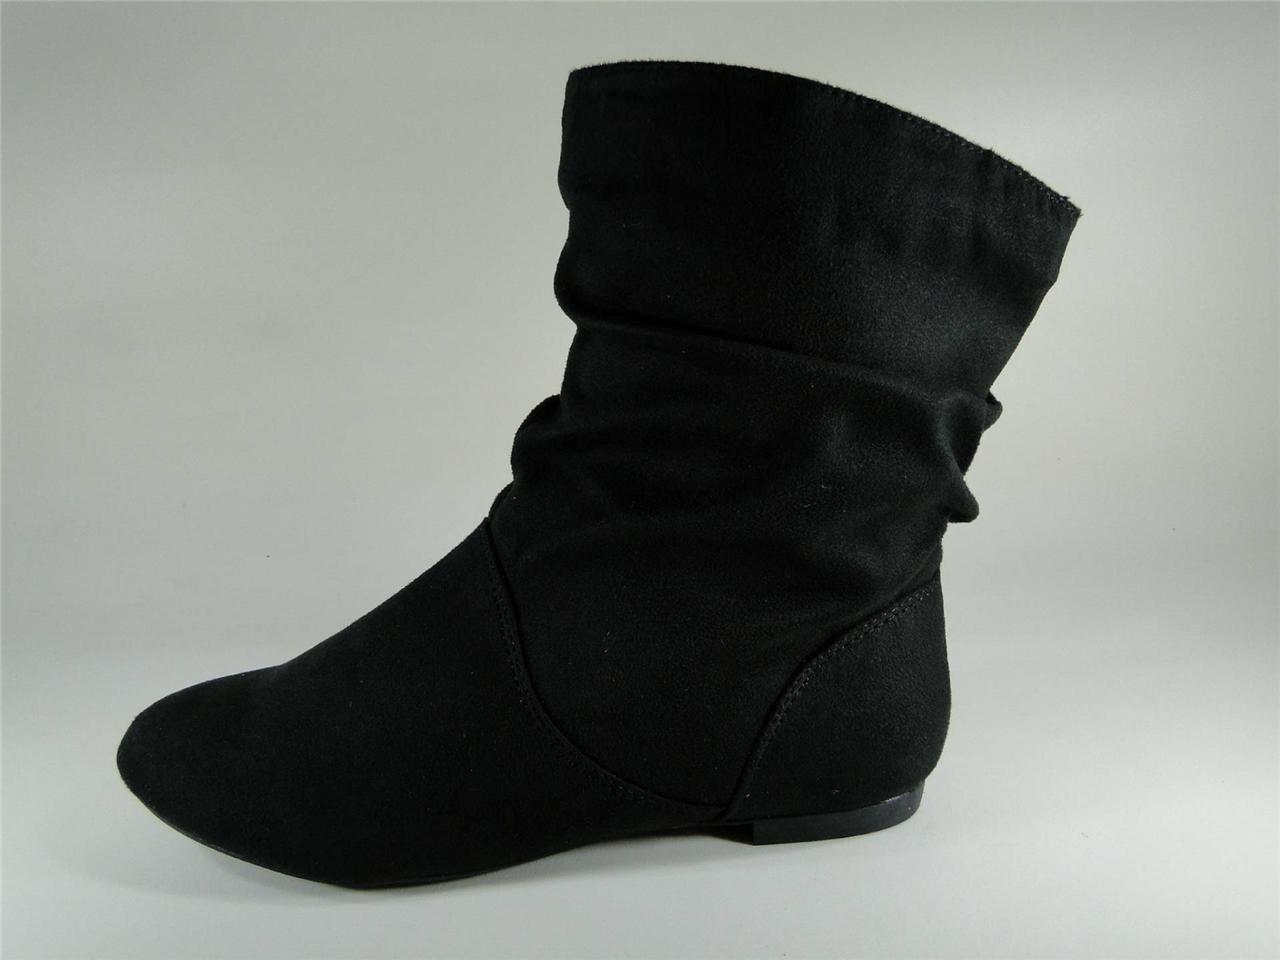 New Women's Black Slouchy Ankle High Flat Boots Sz 7.5 #F97